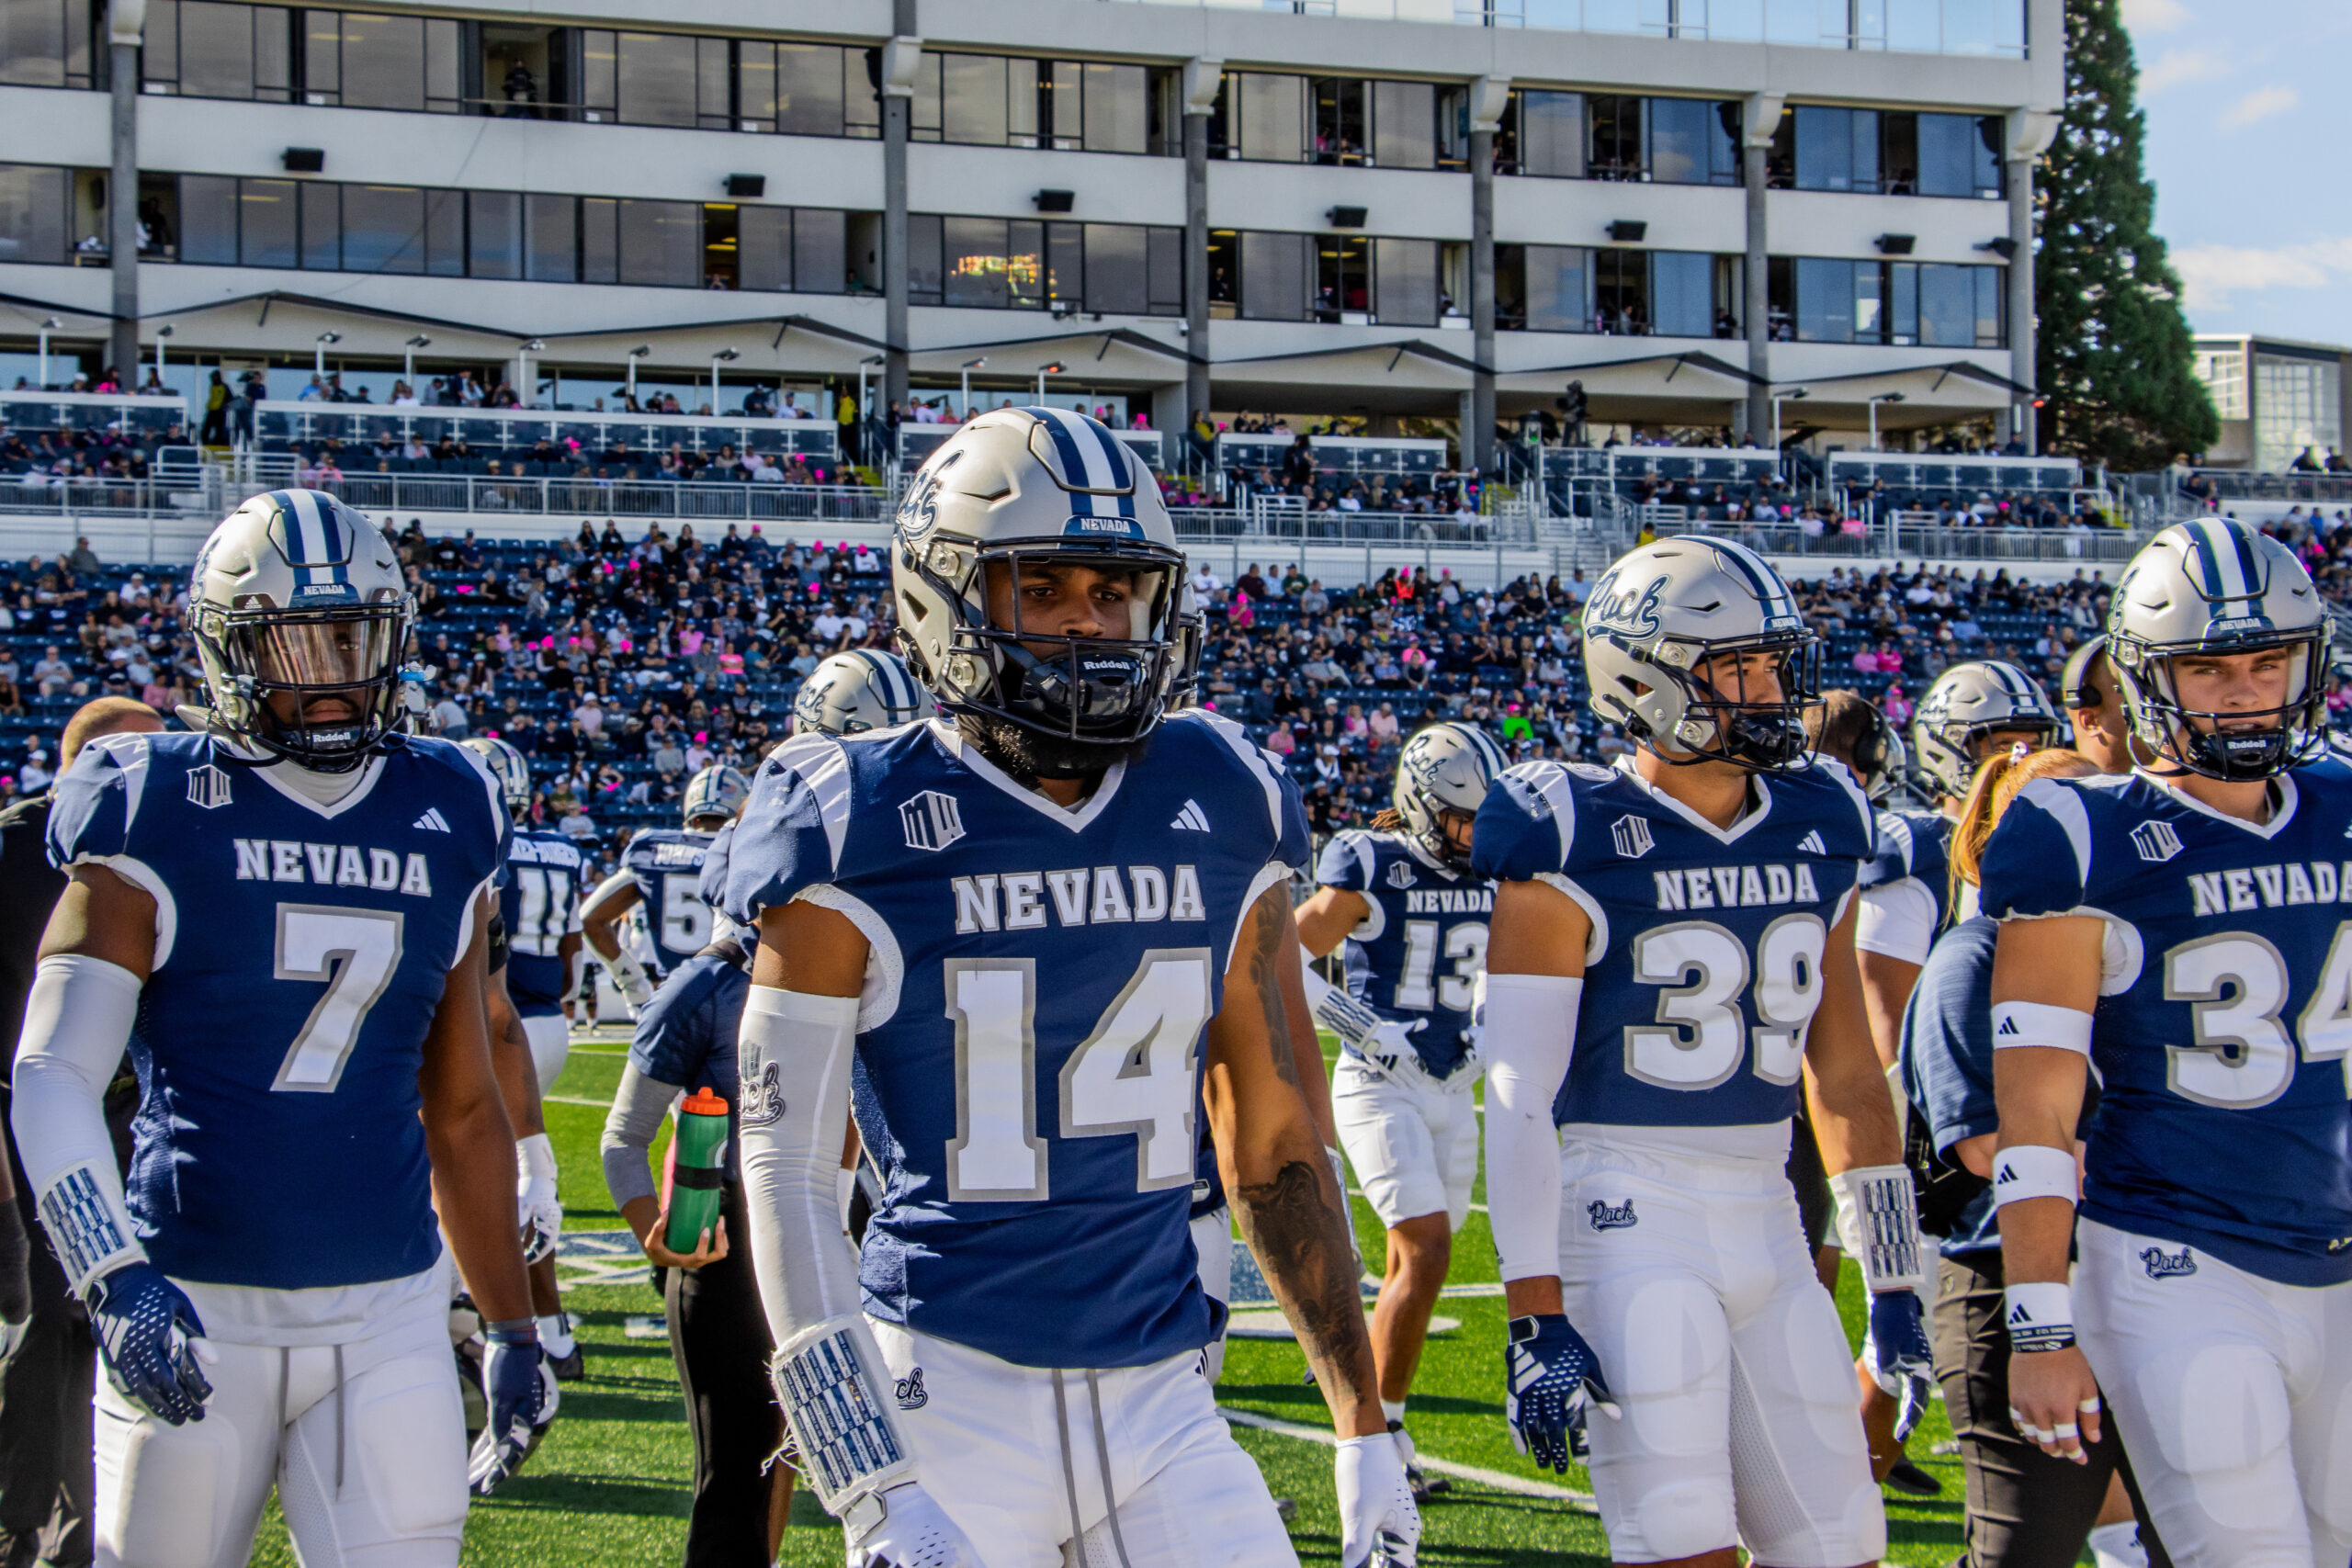 Our takeaways from Nevada football’s Silver and Blue spring game